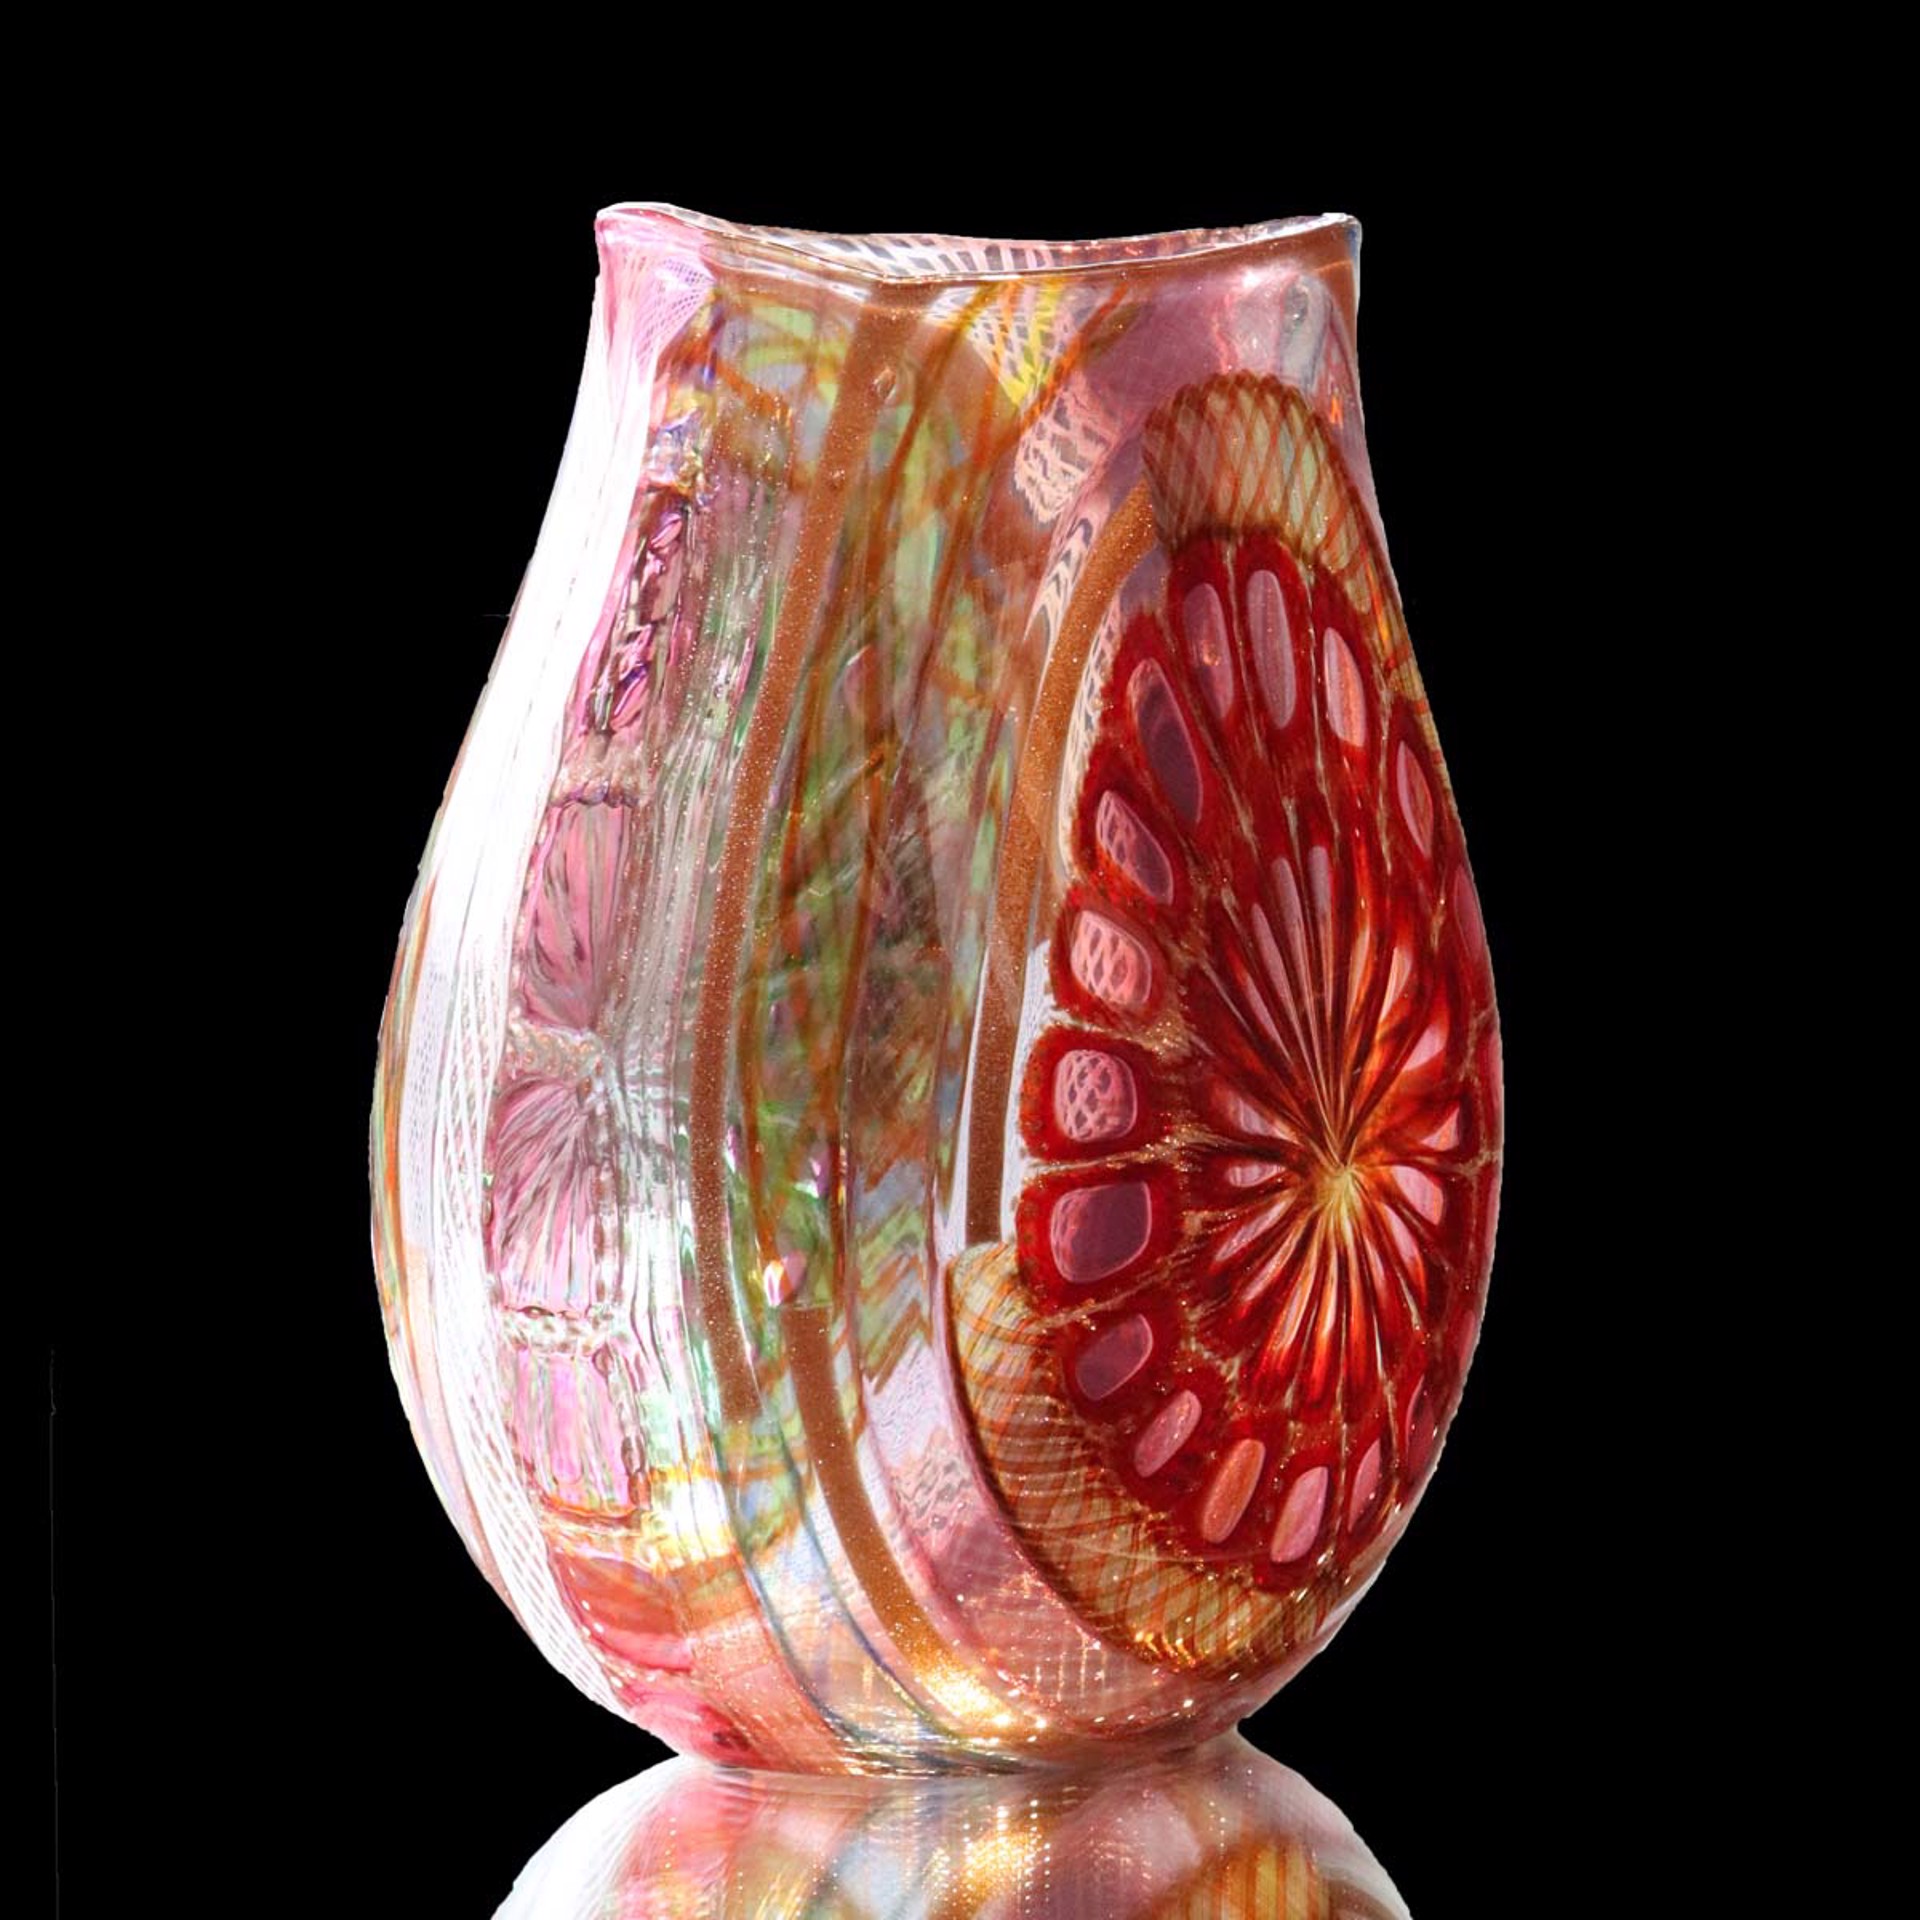 Red, White & Gold by Murano Glass Artists